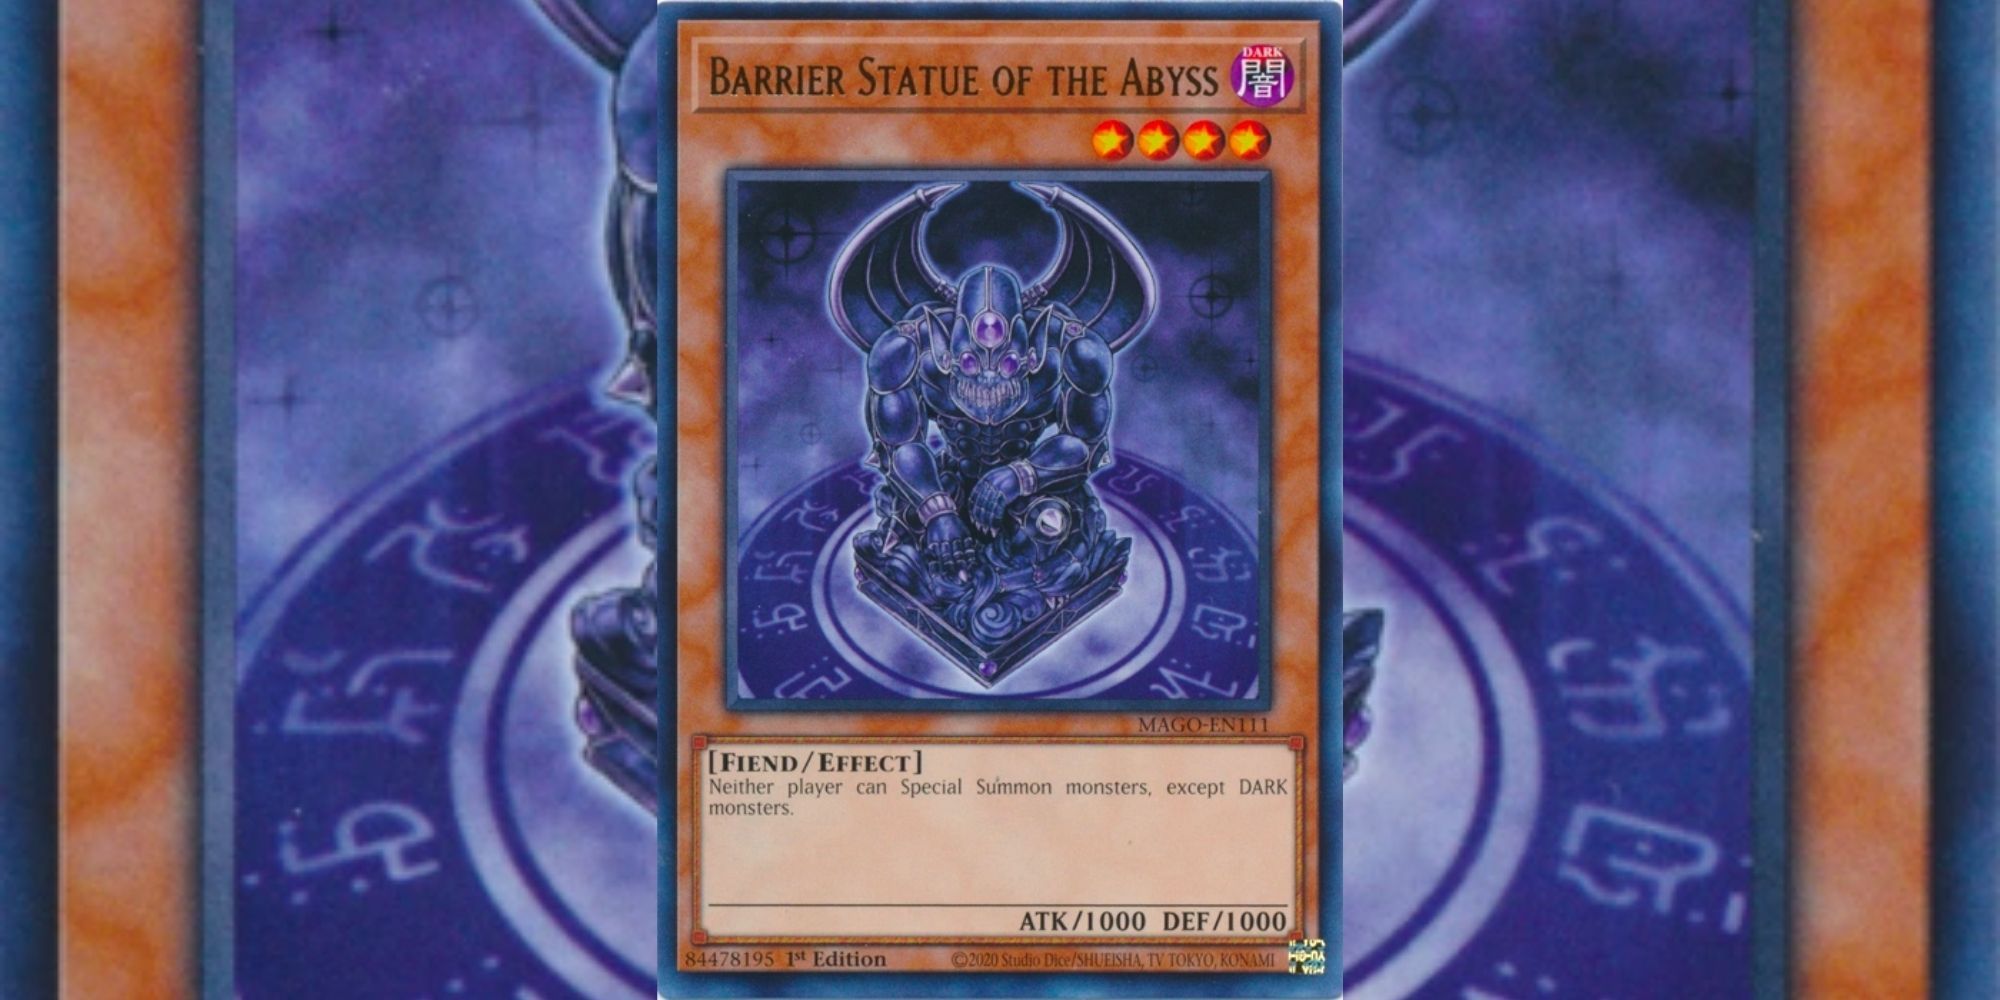 Barrier Statue of the Abyss card in Yu-Gi-Oh! 